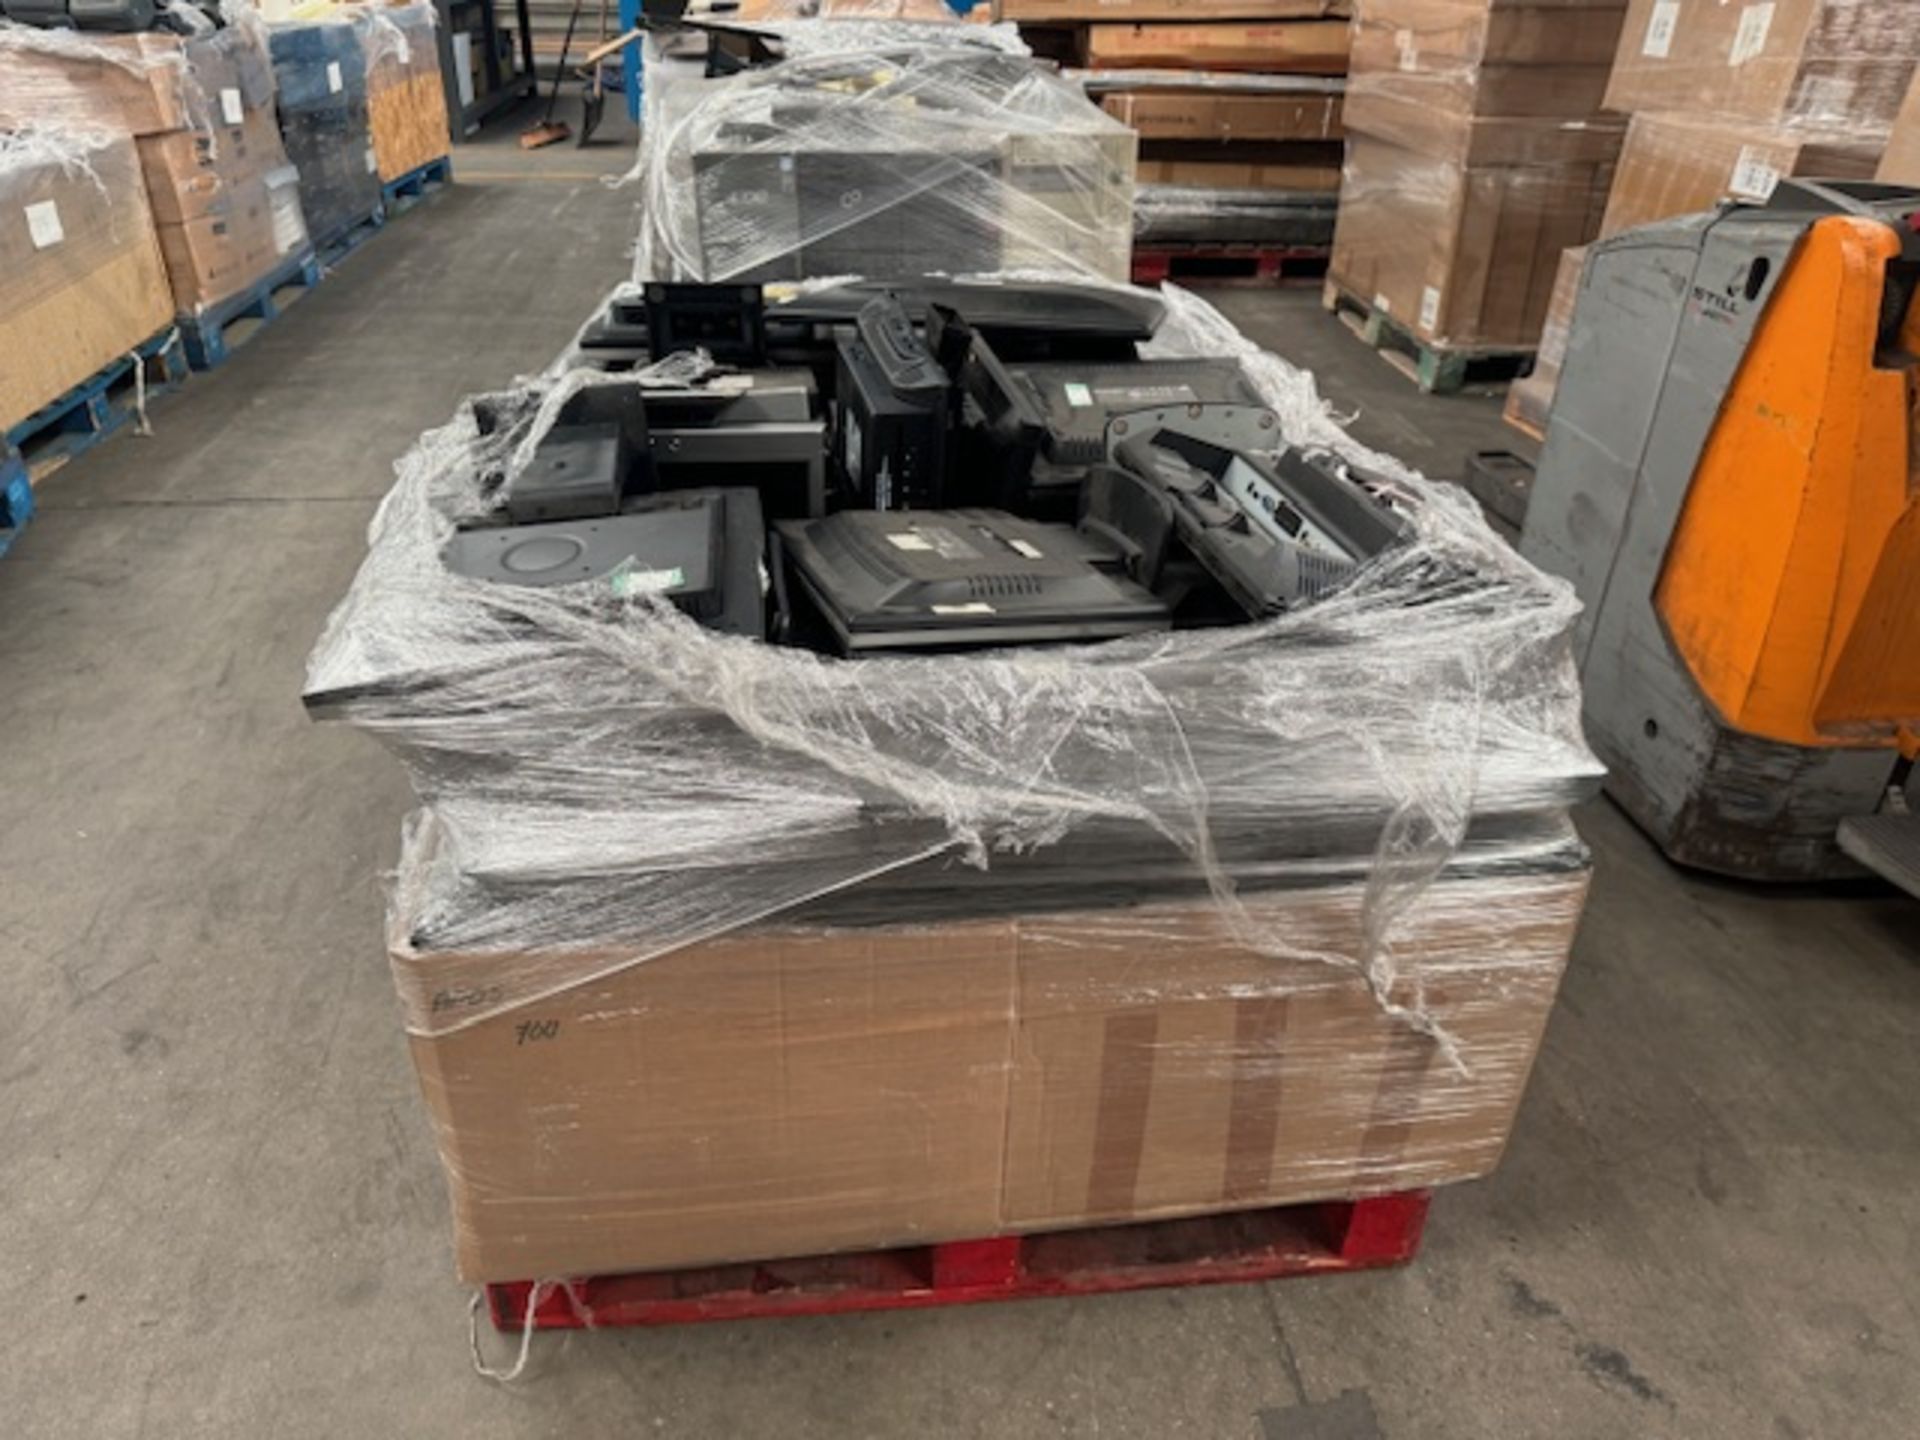 IT PALLET LOT INCLUDING A LARGE QUANTITY OF KEYBOARDS COMPUTER MONITORS ETC IN VARIOUS BRANDS - Image 2 of 3